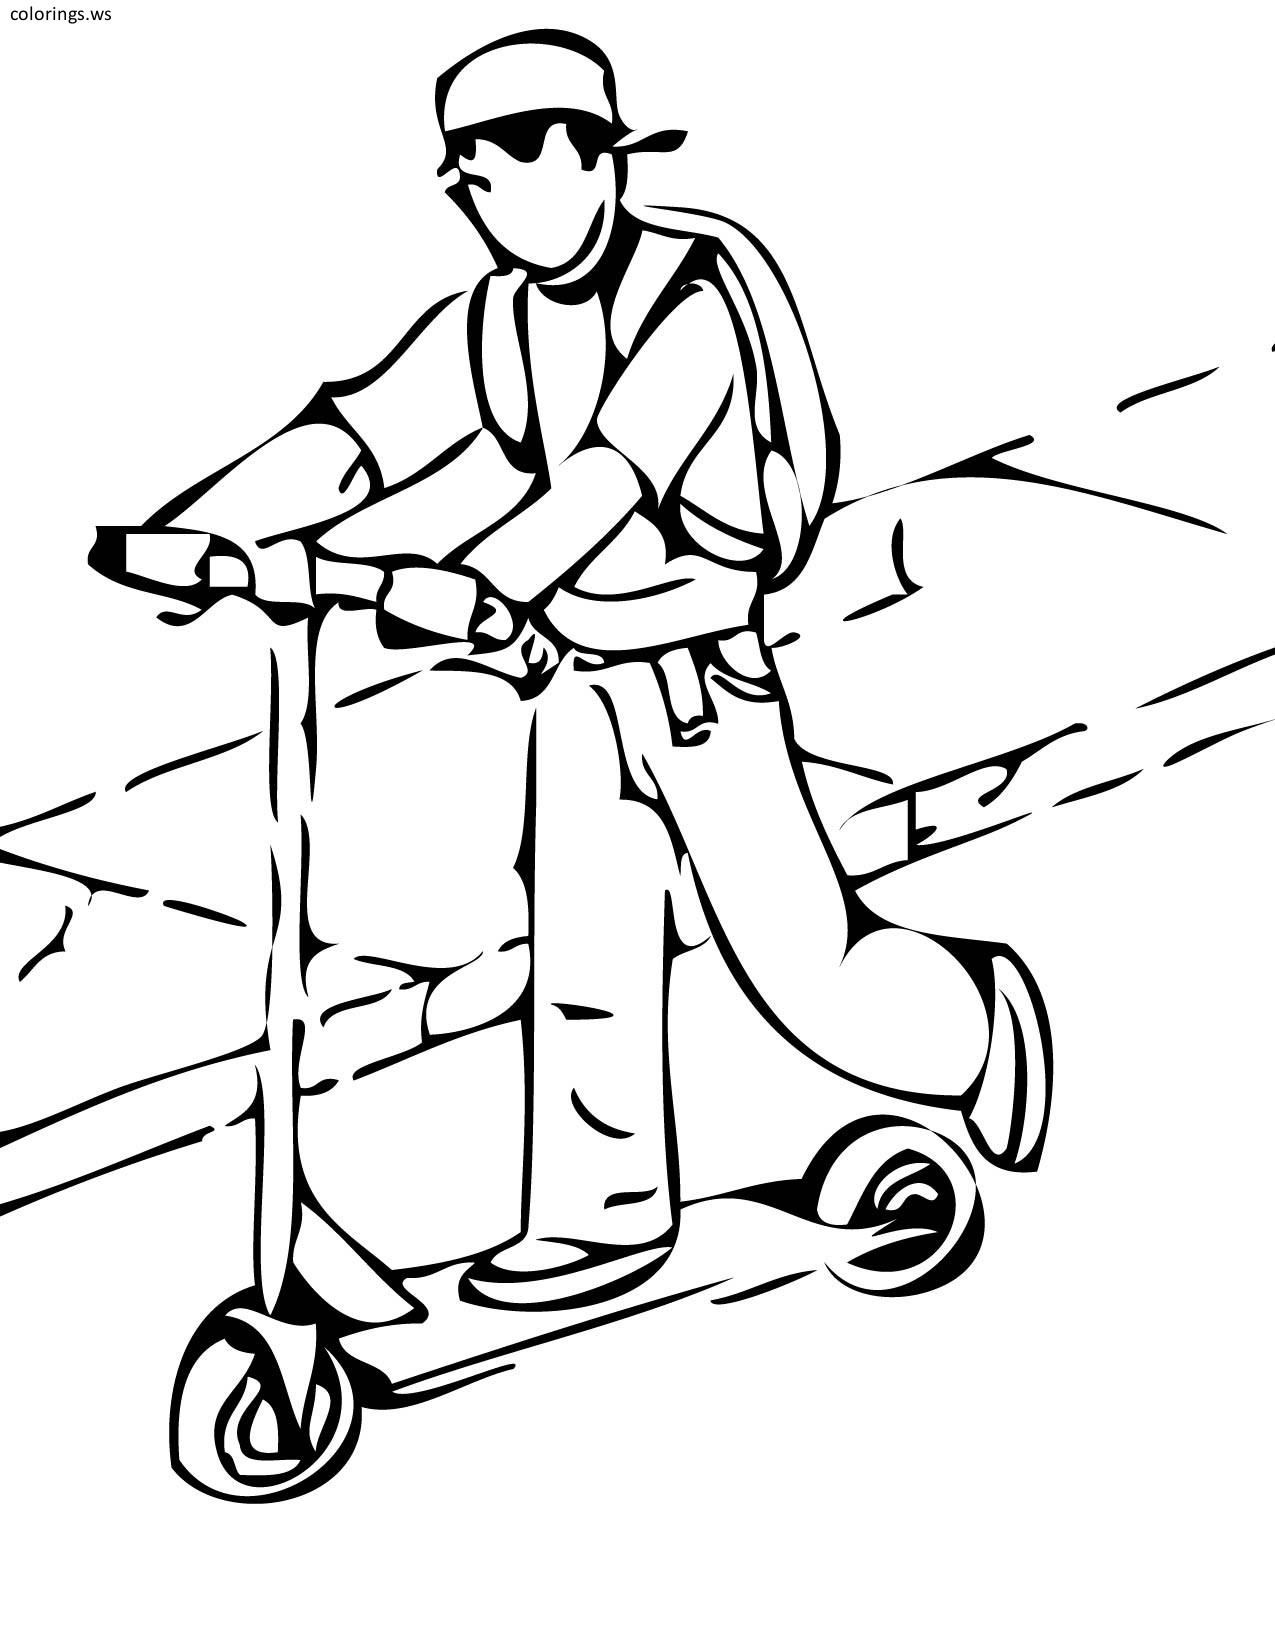 pro scooter coloring pages